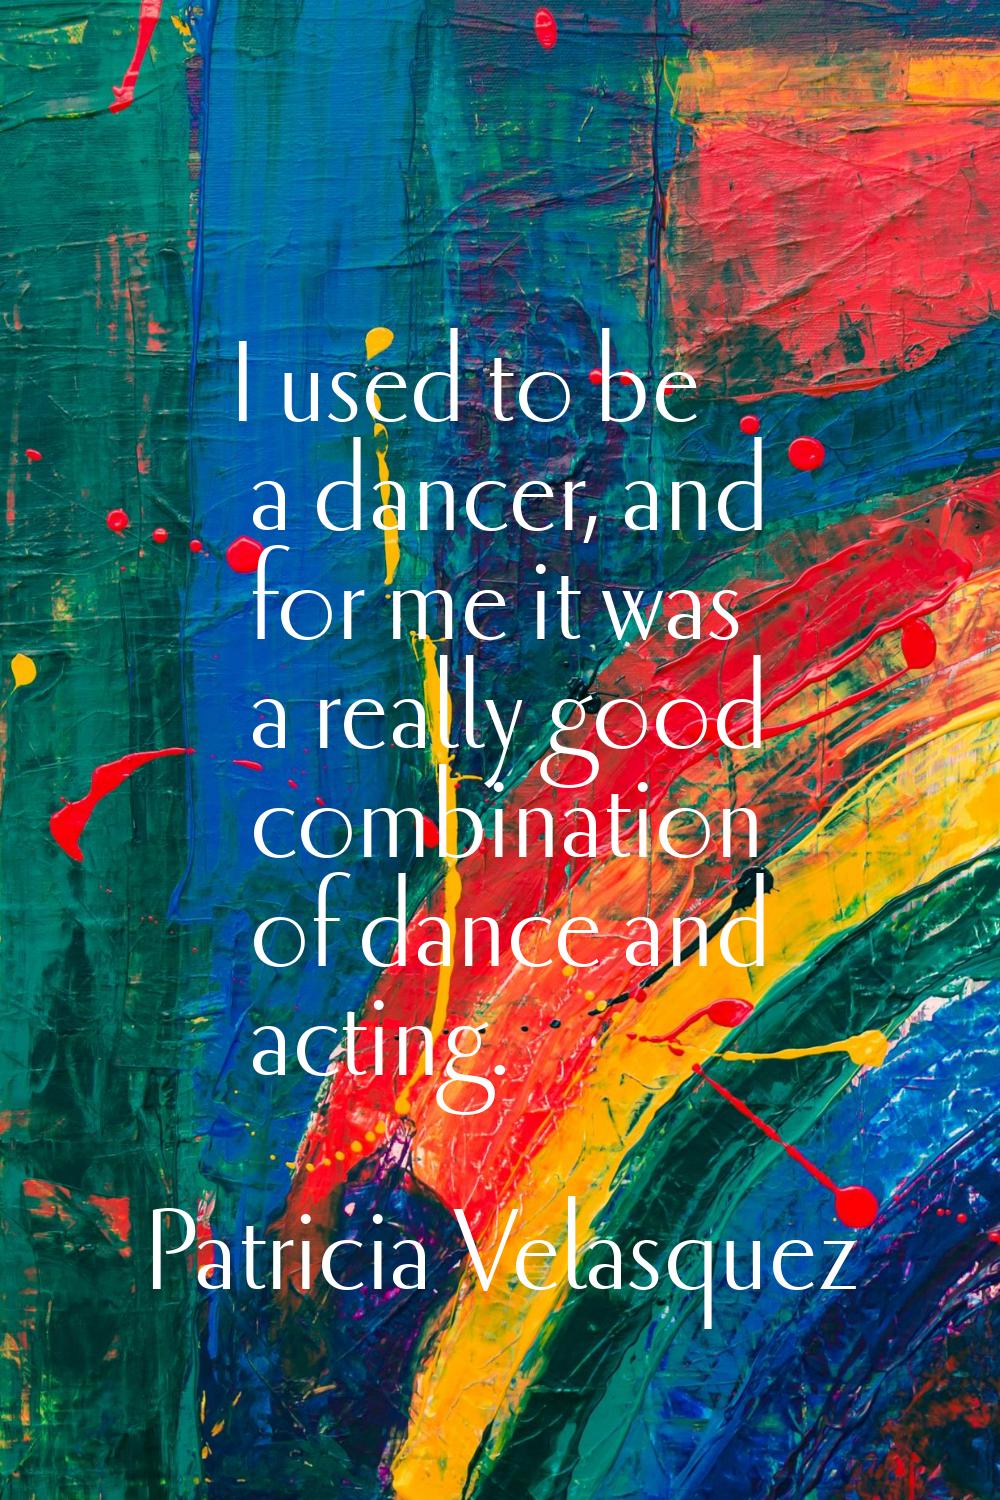 I used to be a dancer, and for me it was a really good combination of dance and acting.